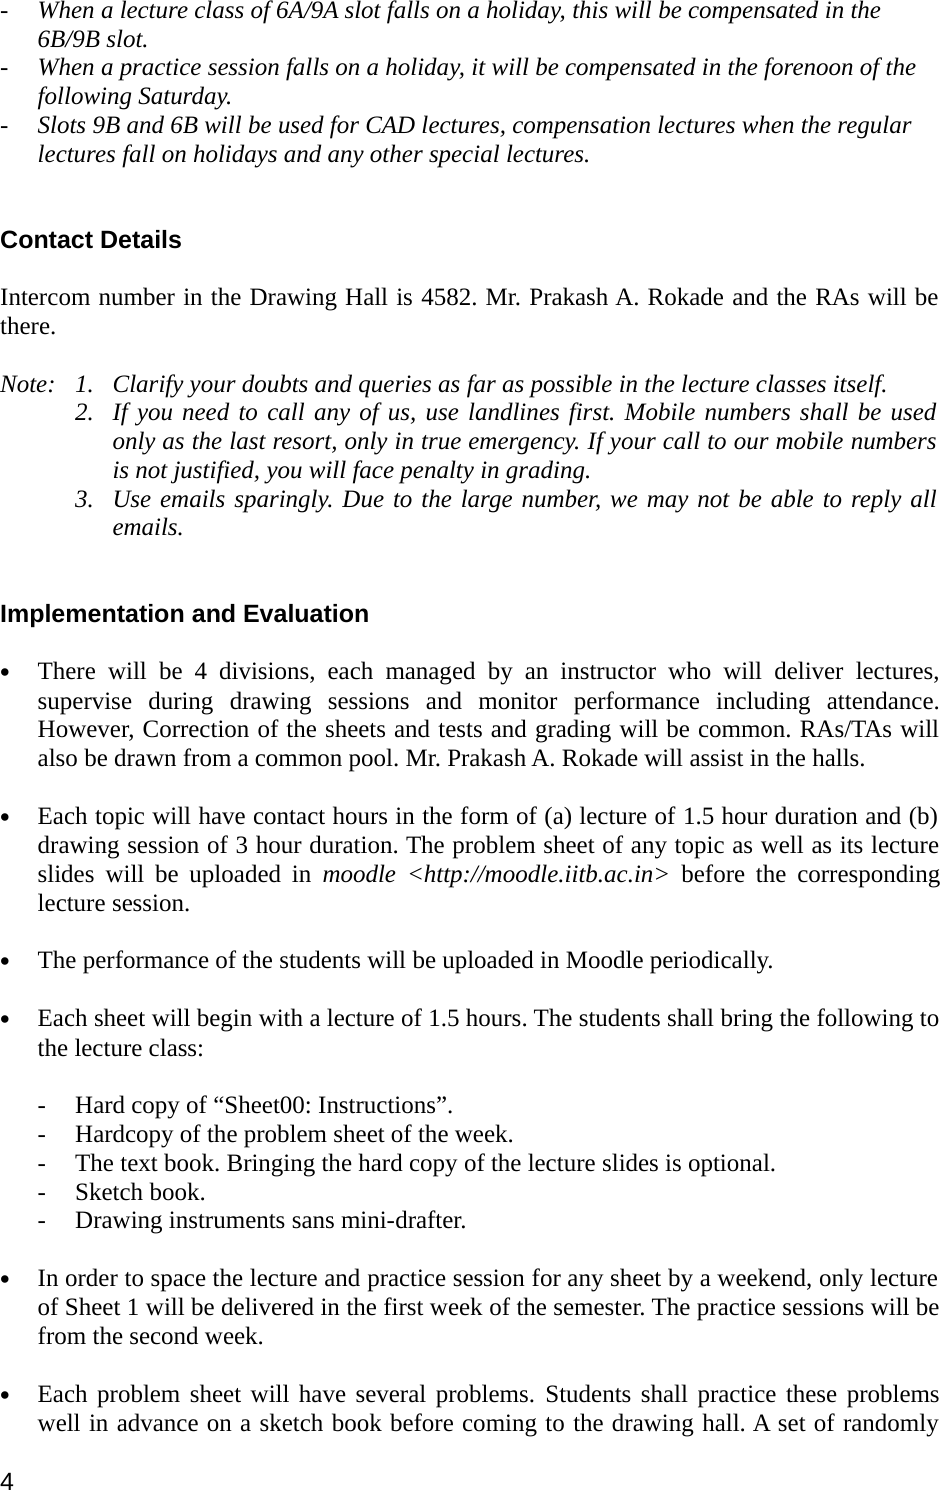 Page 4 of 8 - ME-119: ENGINEERING GRAPHICS AND DRAWING Sheet00-Instructions For Students-20140825